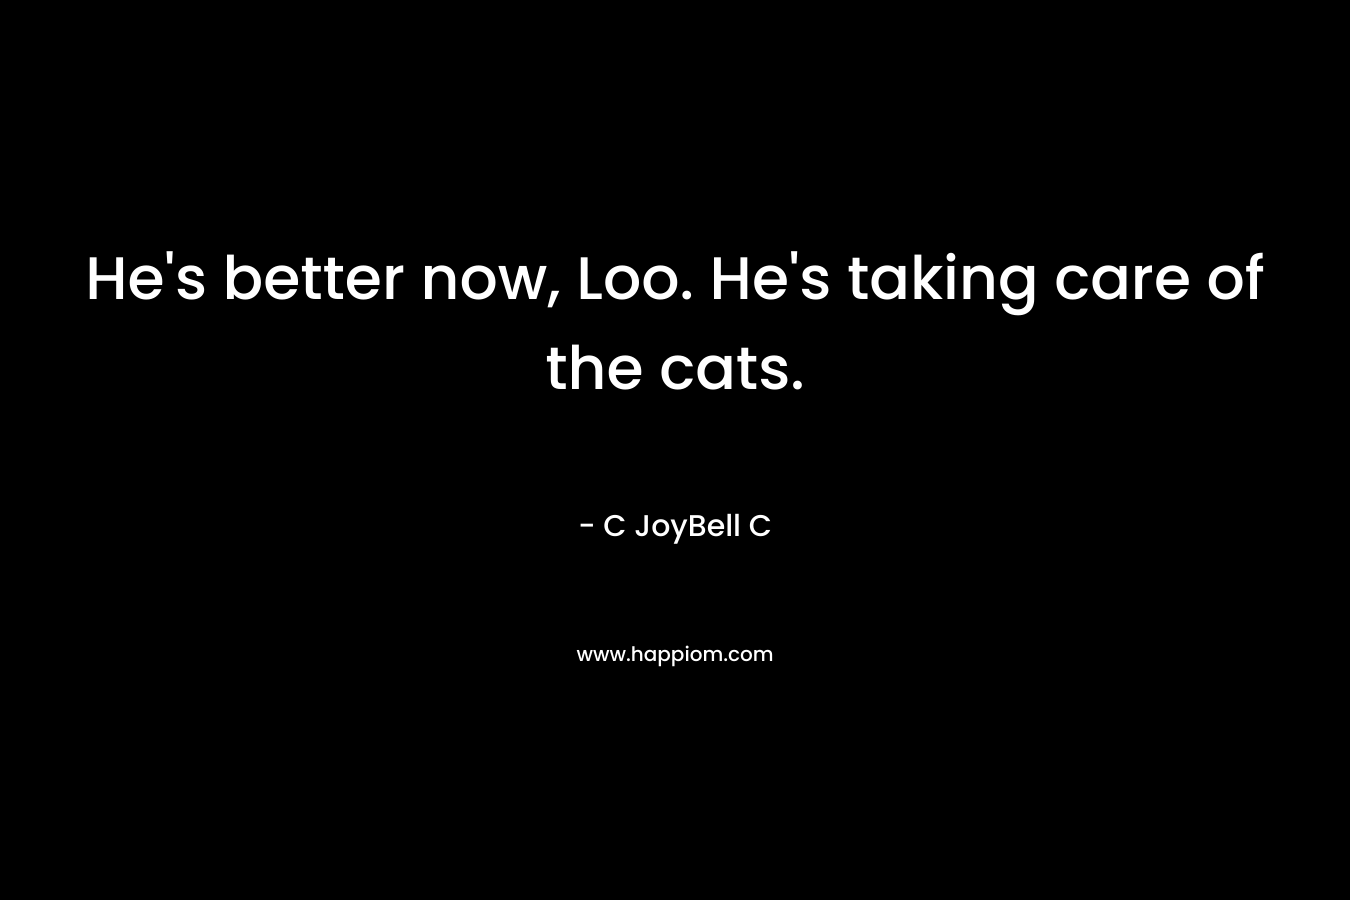 He’s better now, Loo. He’s taking care of the cats. – C JoyBell C